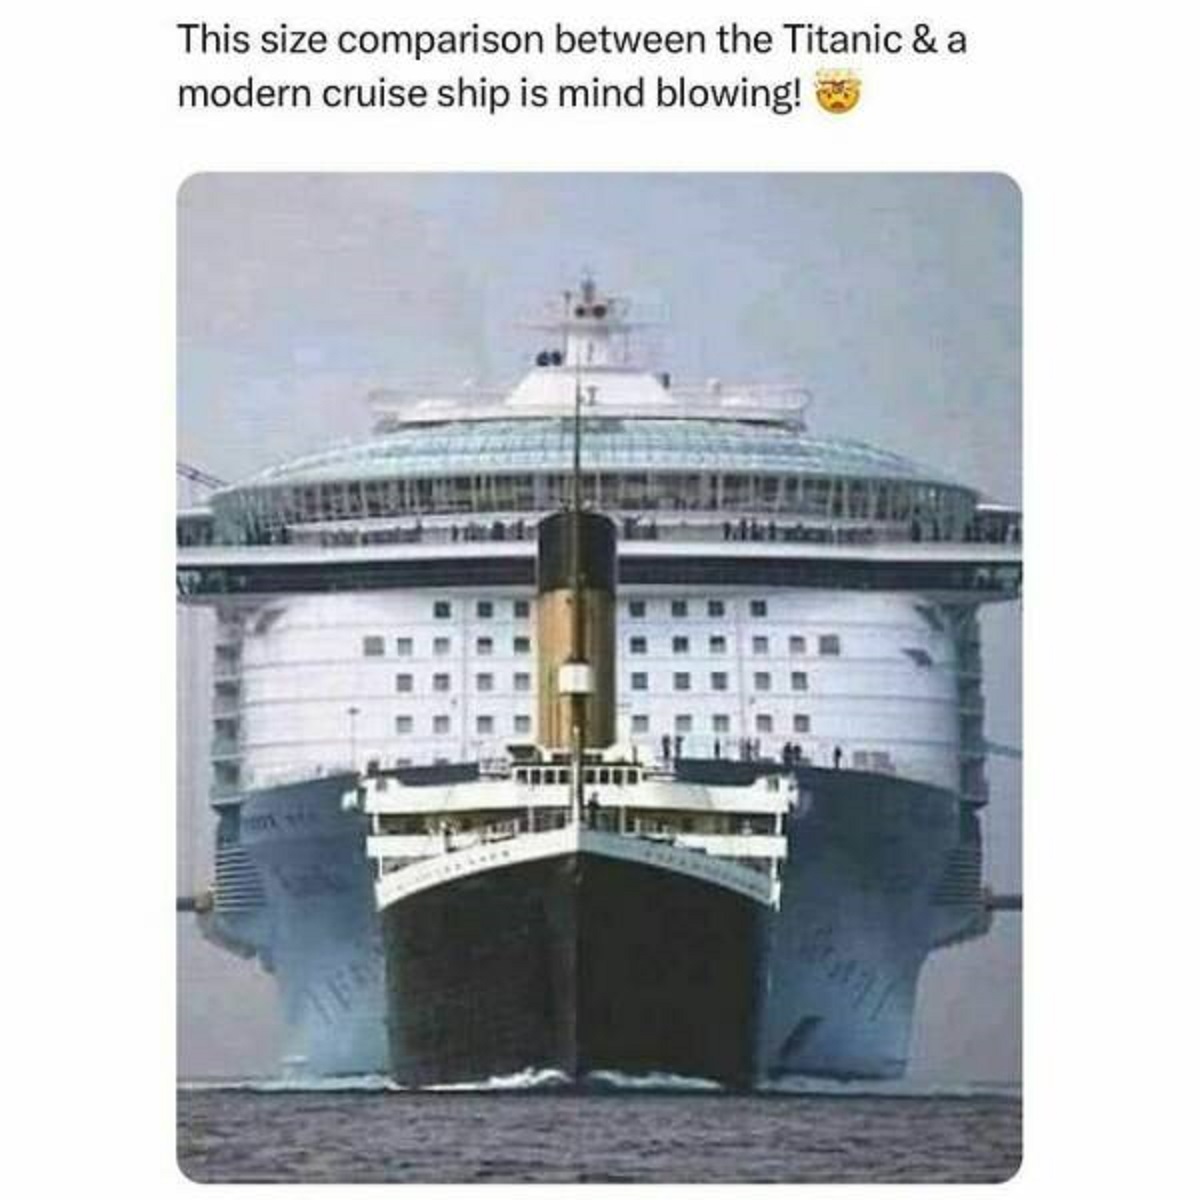 big was the titanic compared - This size comparison between the Titanic & a modern cruise ship is mind blowing!